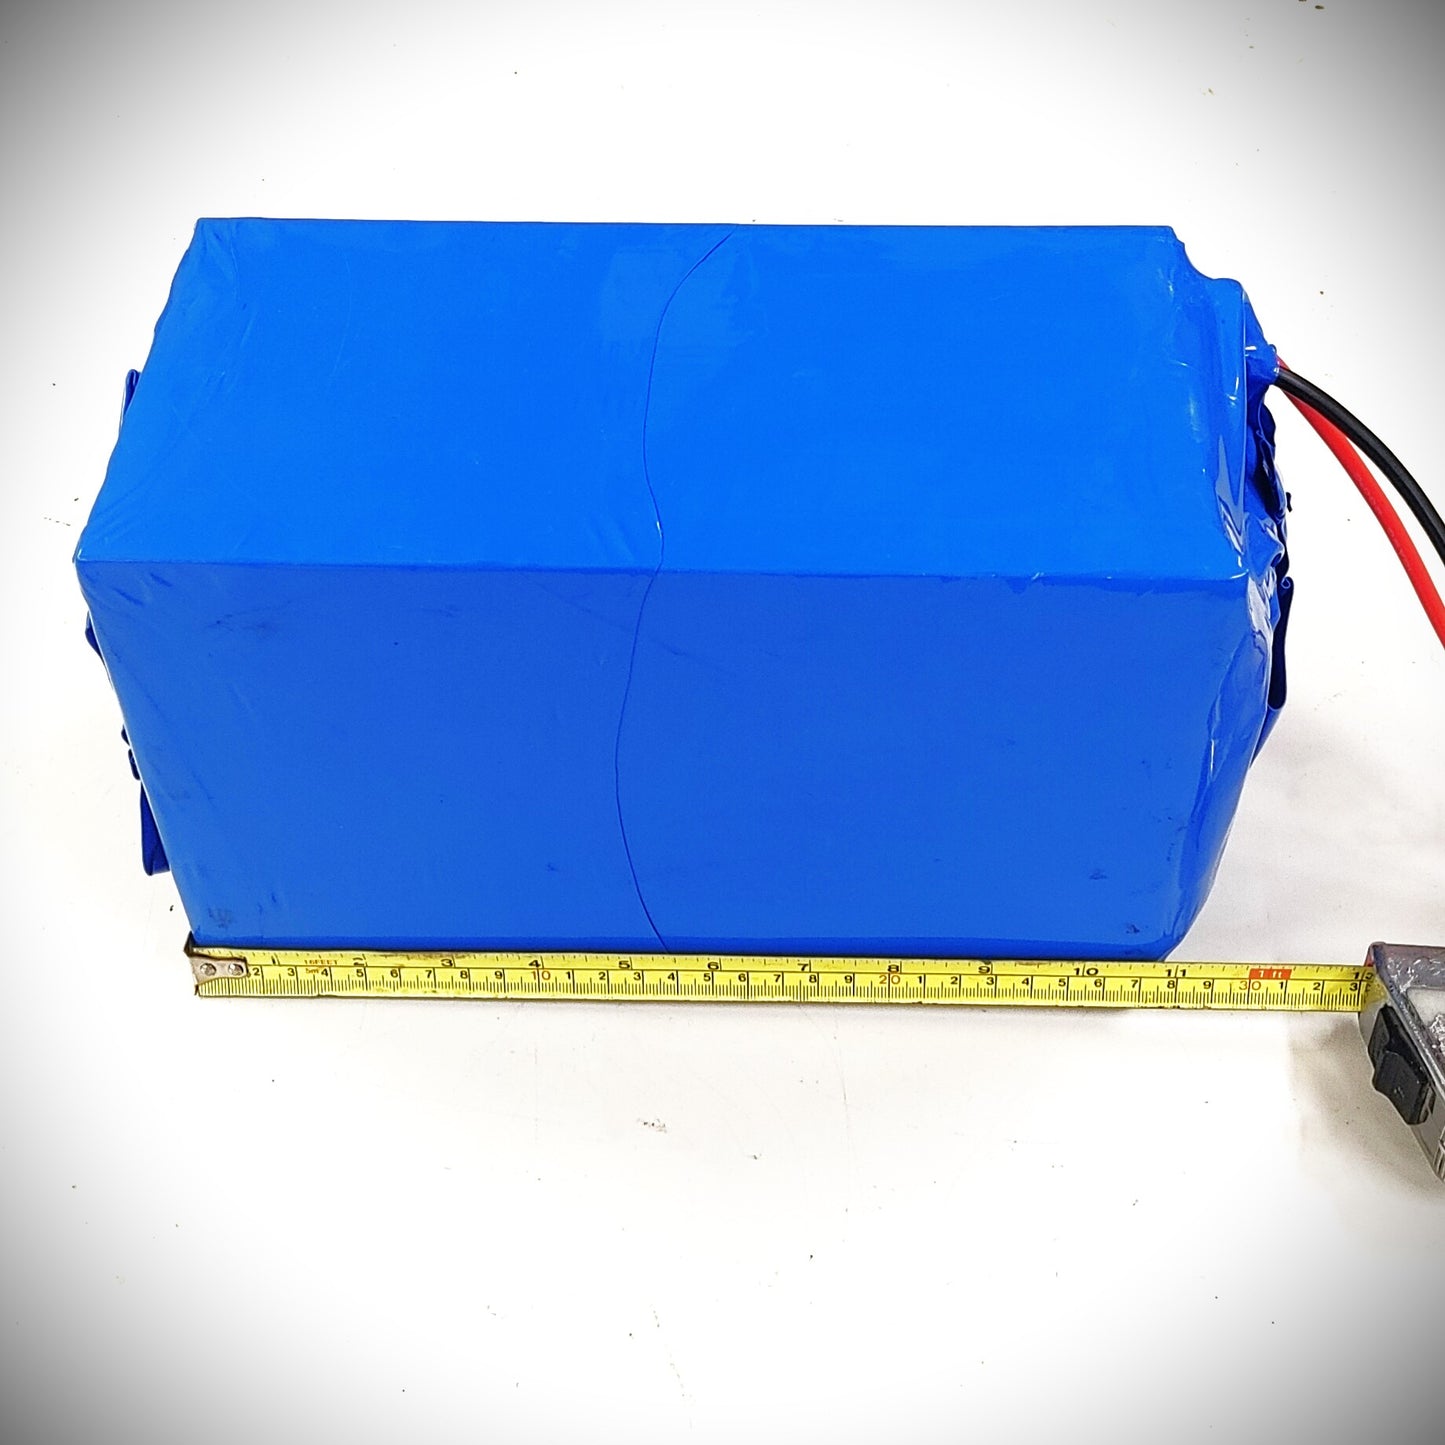 72V 38AH Eco Battery Pack - Stealth Bomber - Up to 5KW